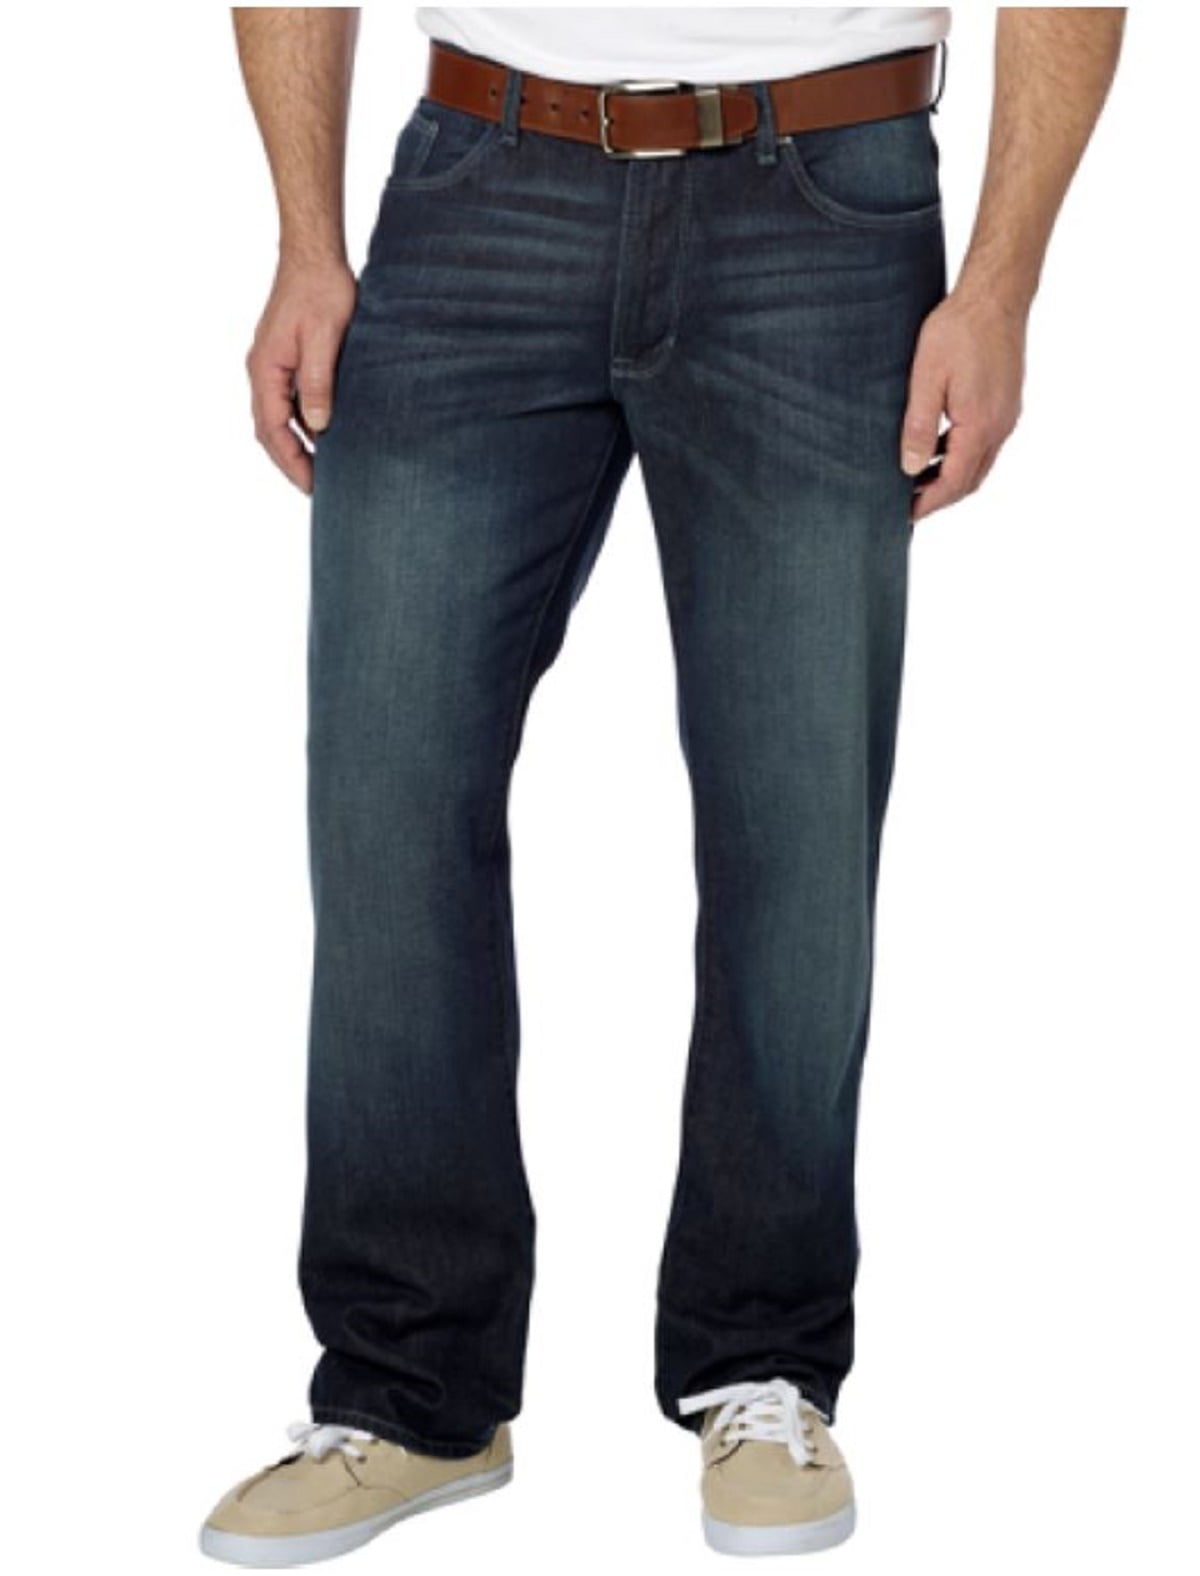 DKNY Jeans Mens 'Soho' Relaxed Fit Jeans (30W x 30L, Dark Wash ...